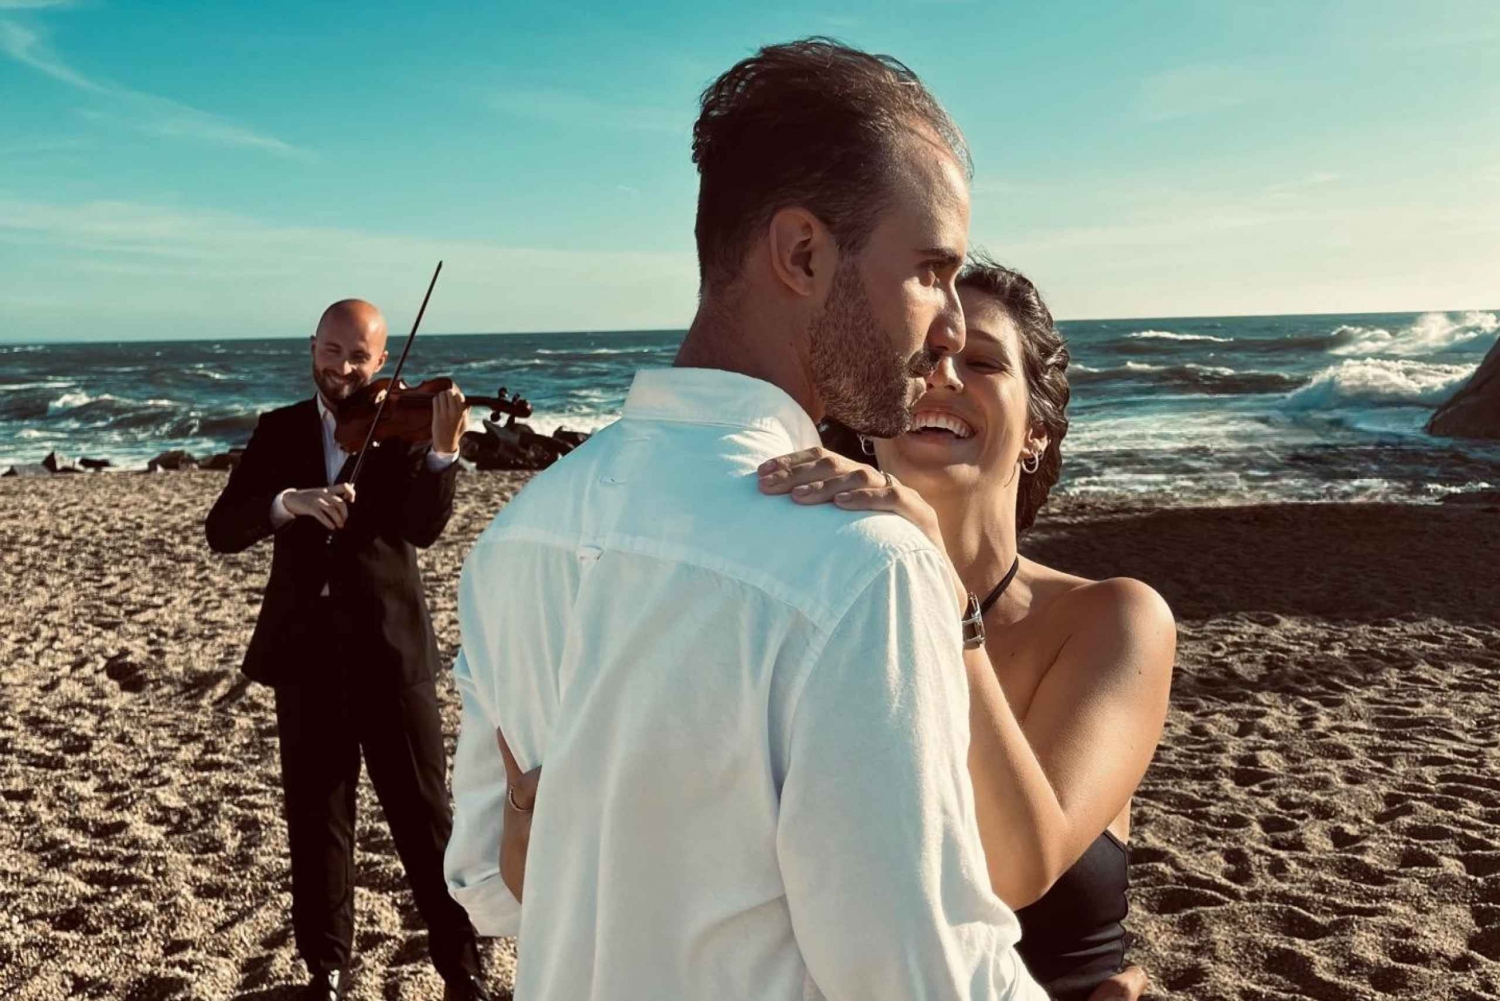 Algarve: Marriage Proposal with Classical Musicians